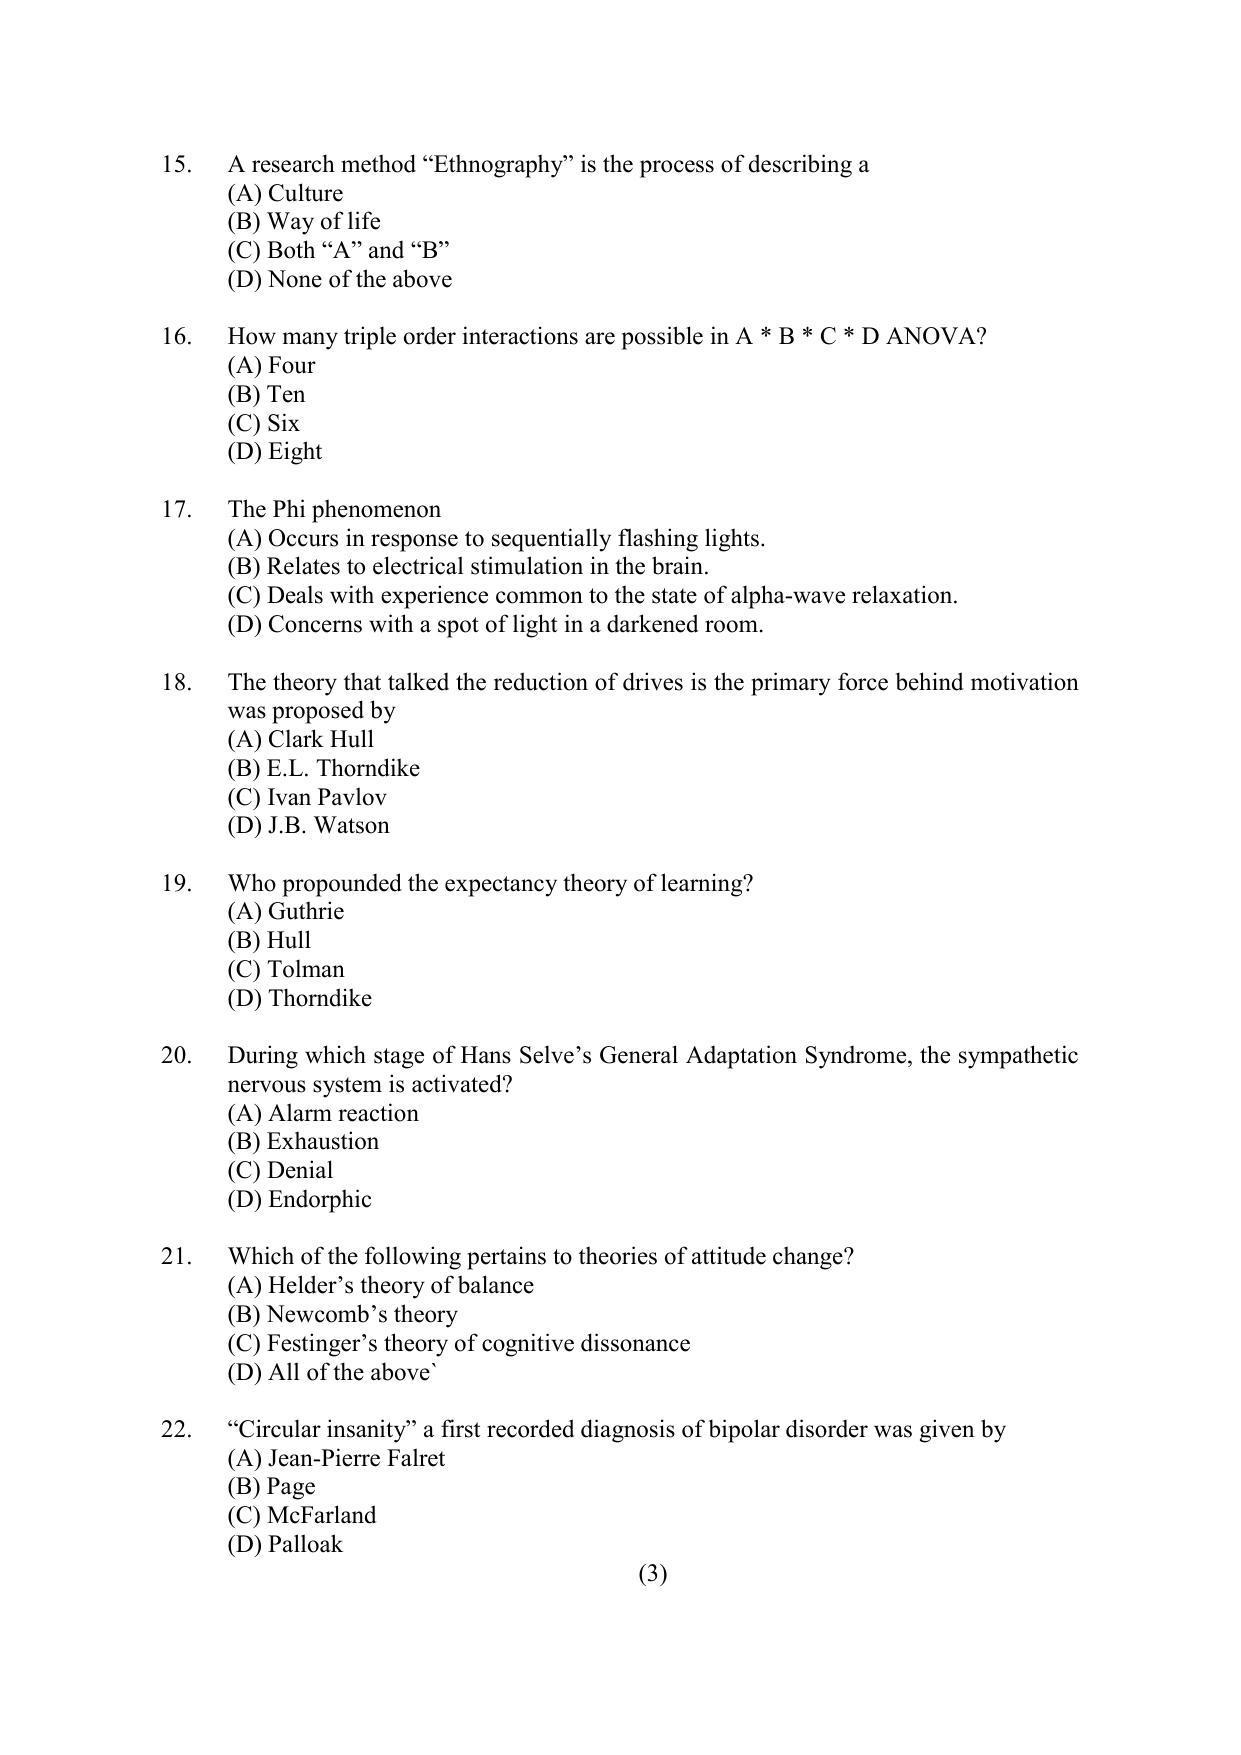 PU MPET Ancient Indian History & Archeology 2022 Question Papers - Page 34